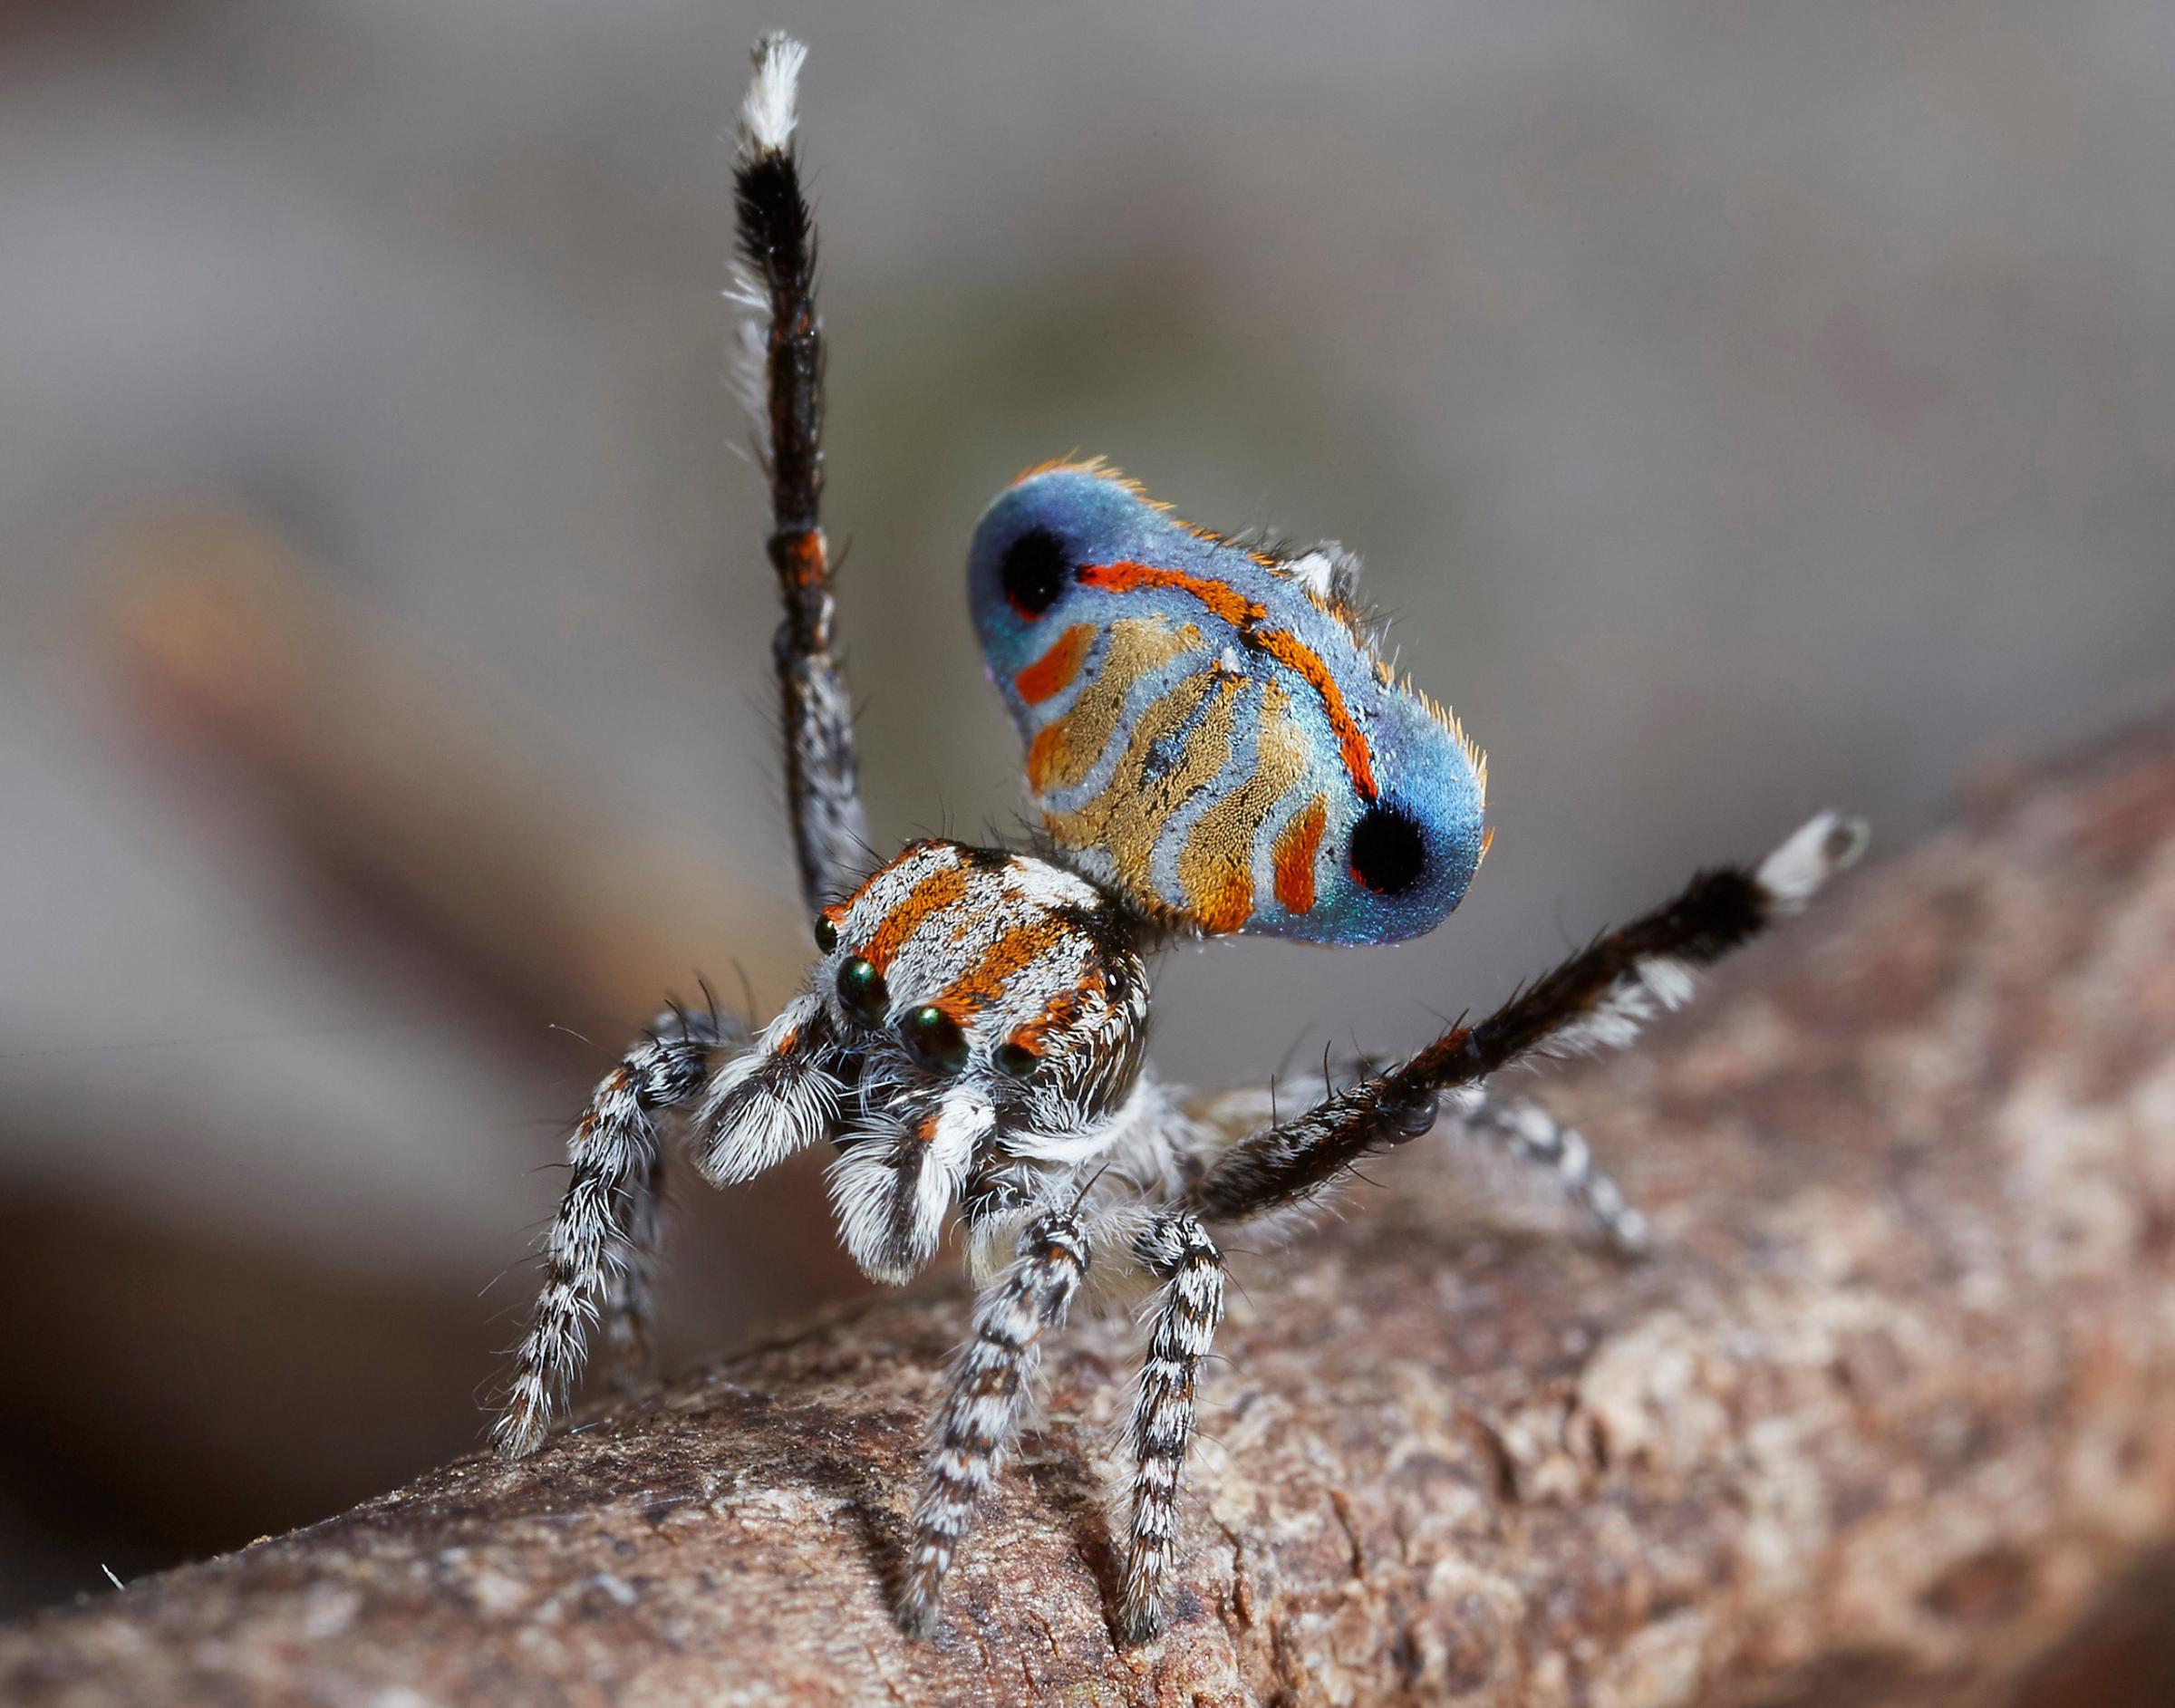 A specimen of the newly-discovered Australian Peacock Spider, Maratus Australis, shows off his colourful abdomen in this undated picture from Australia